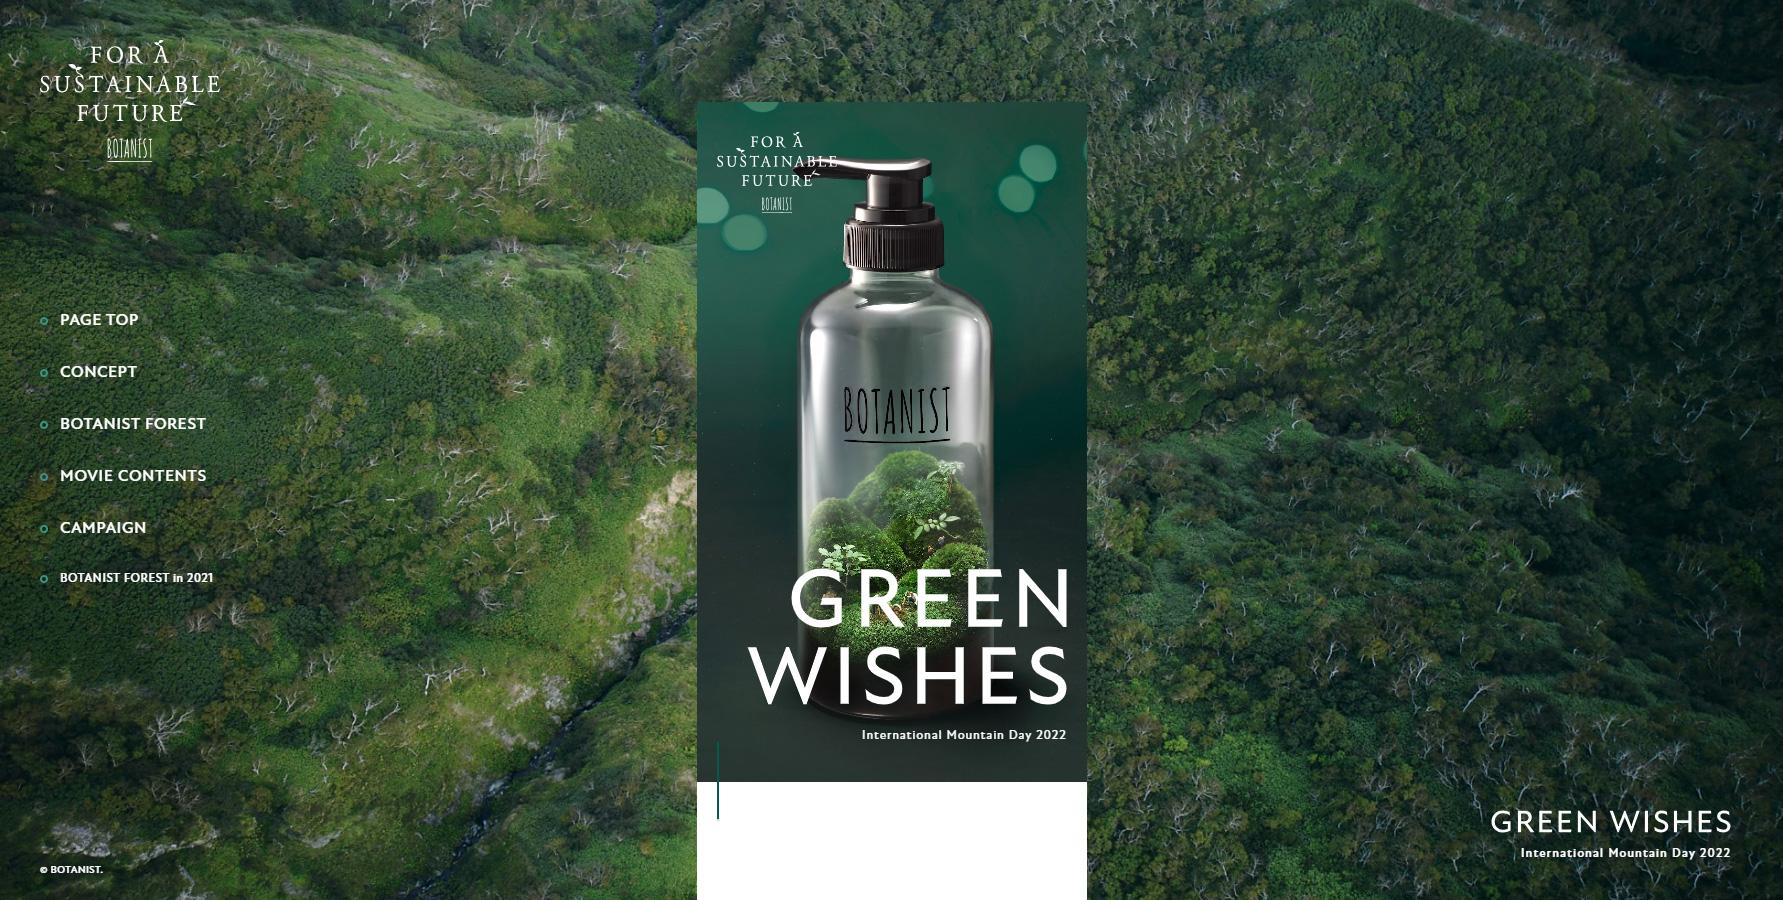 BOTANIST | FOR A SUSTAINABLE FUTURE - Website of the Day